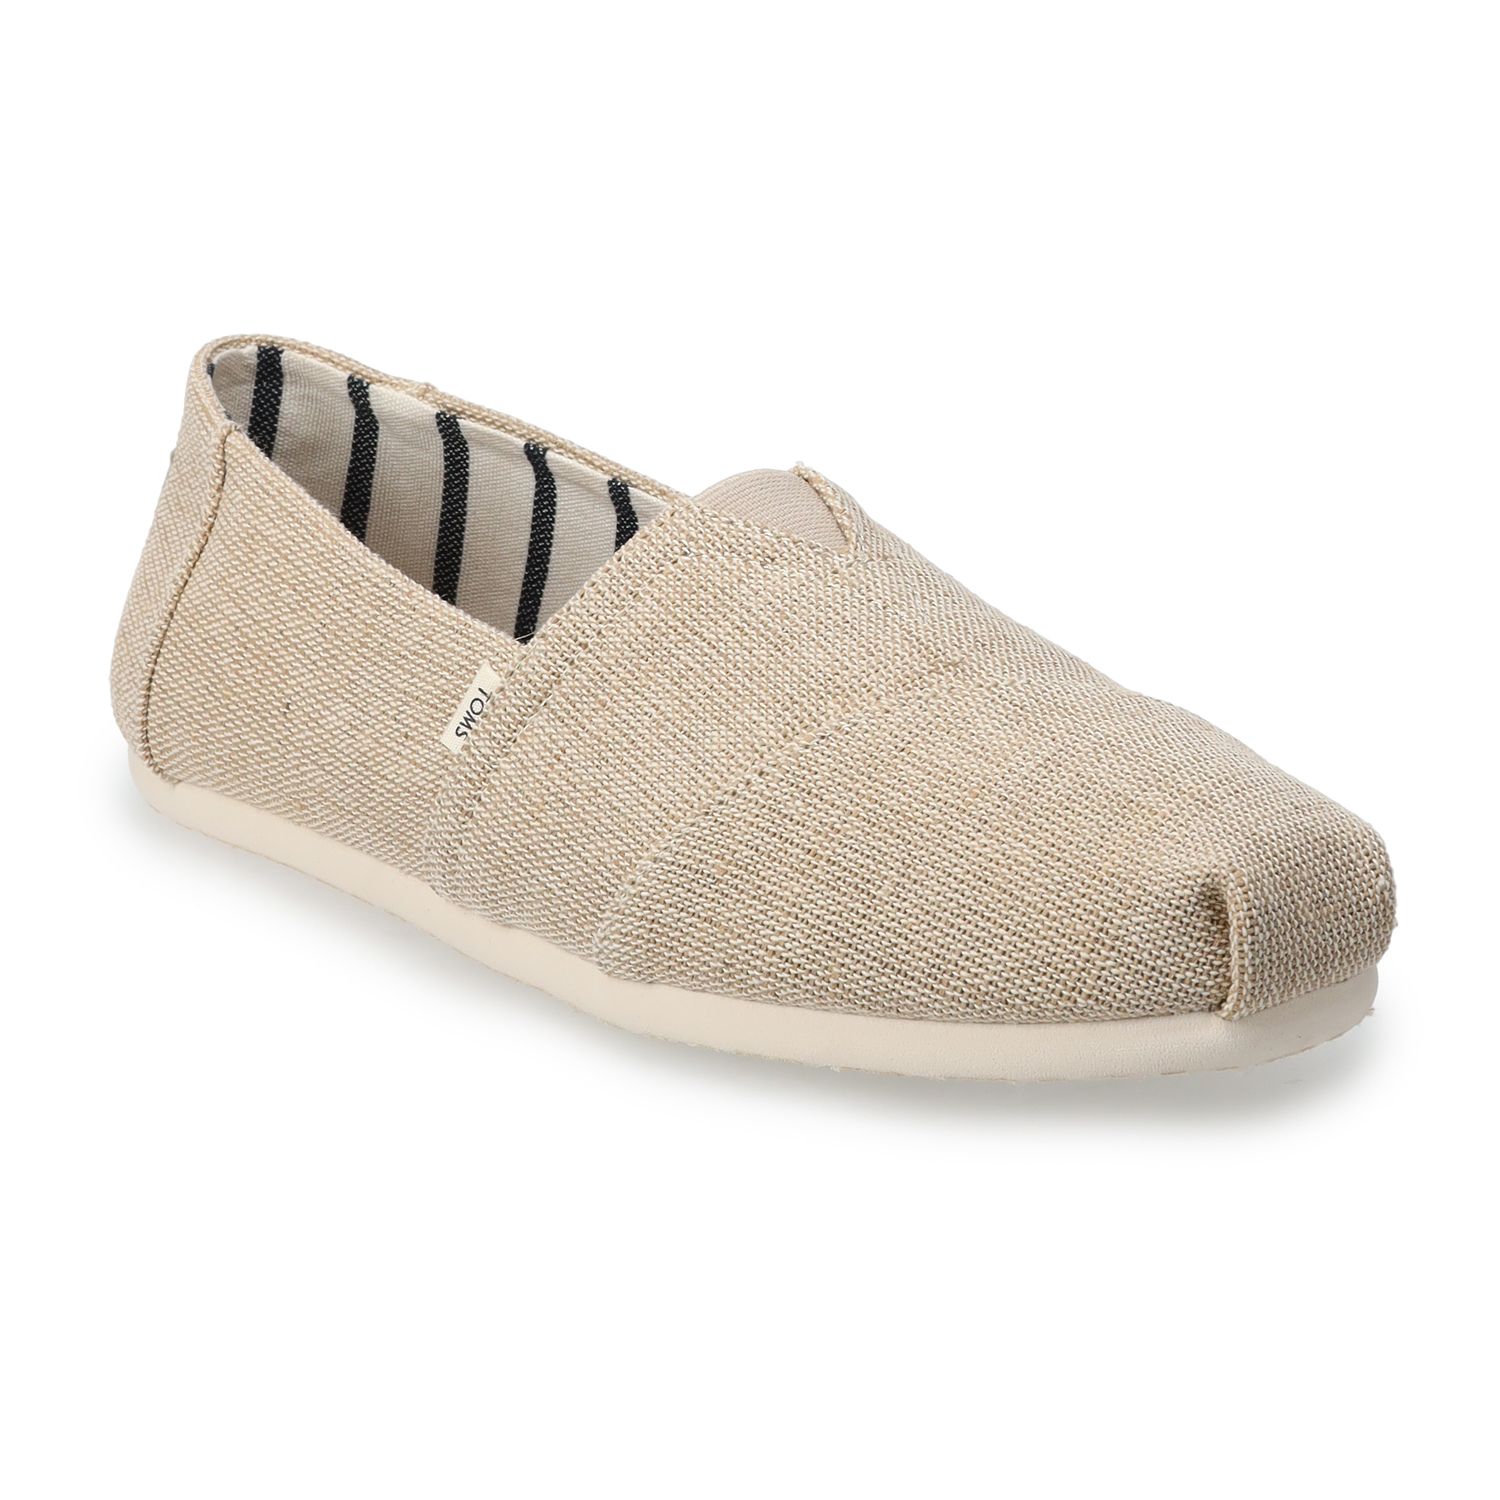 toms shoes for sale near me